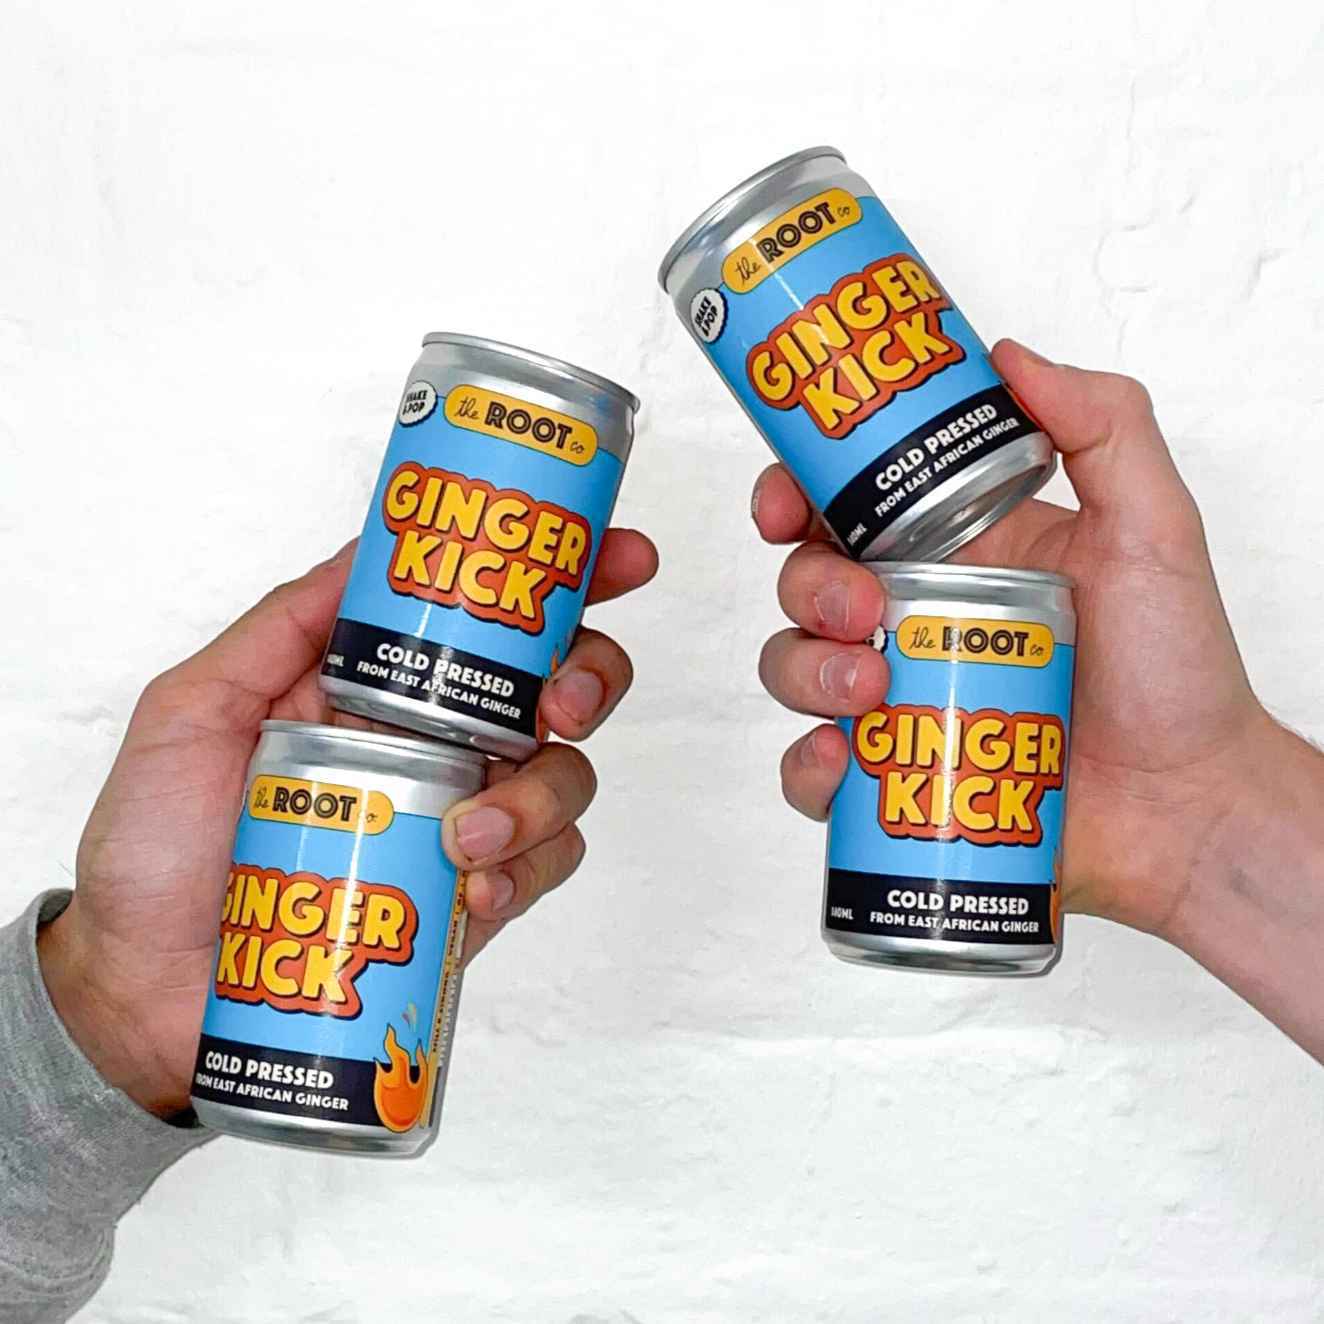 Extra Spicy Ginger Kick Soda (4x cans)